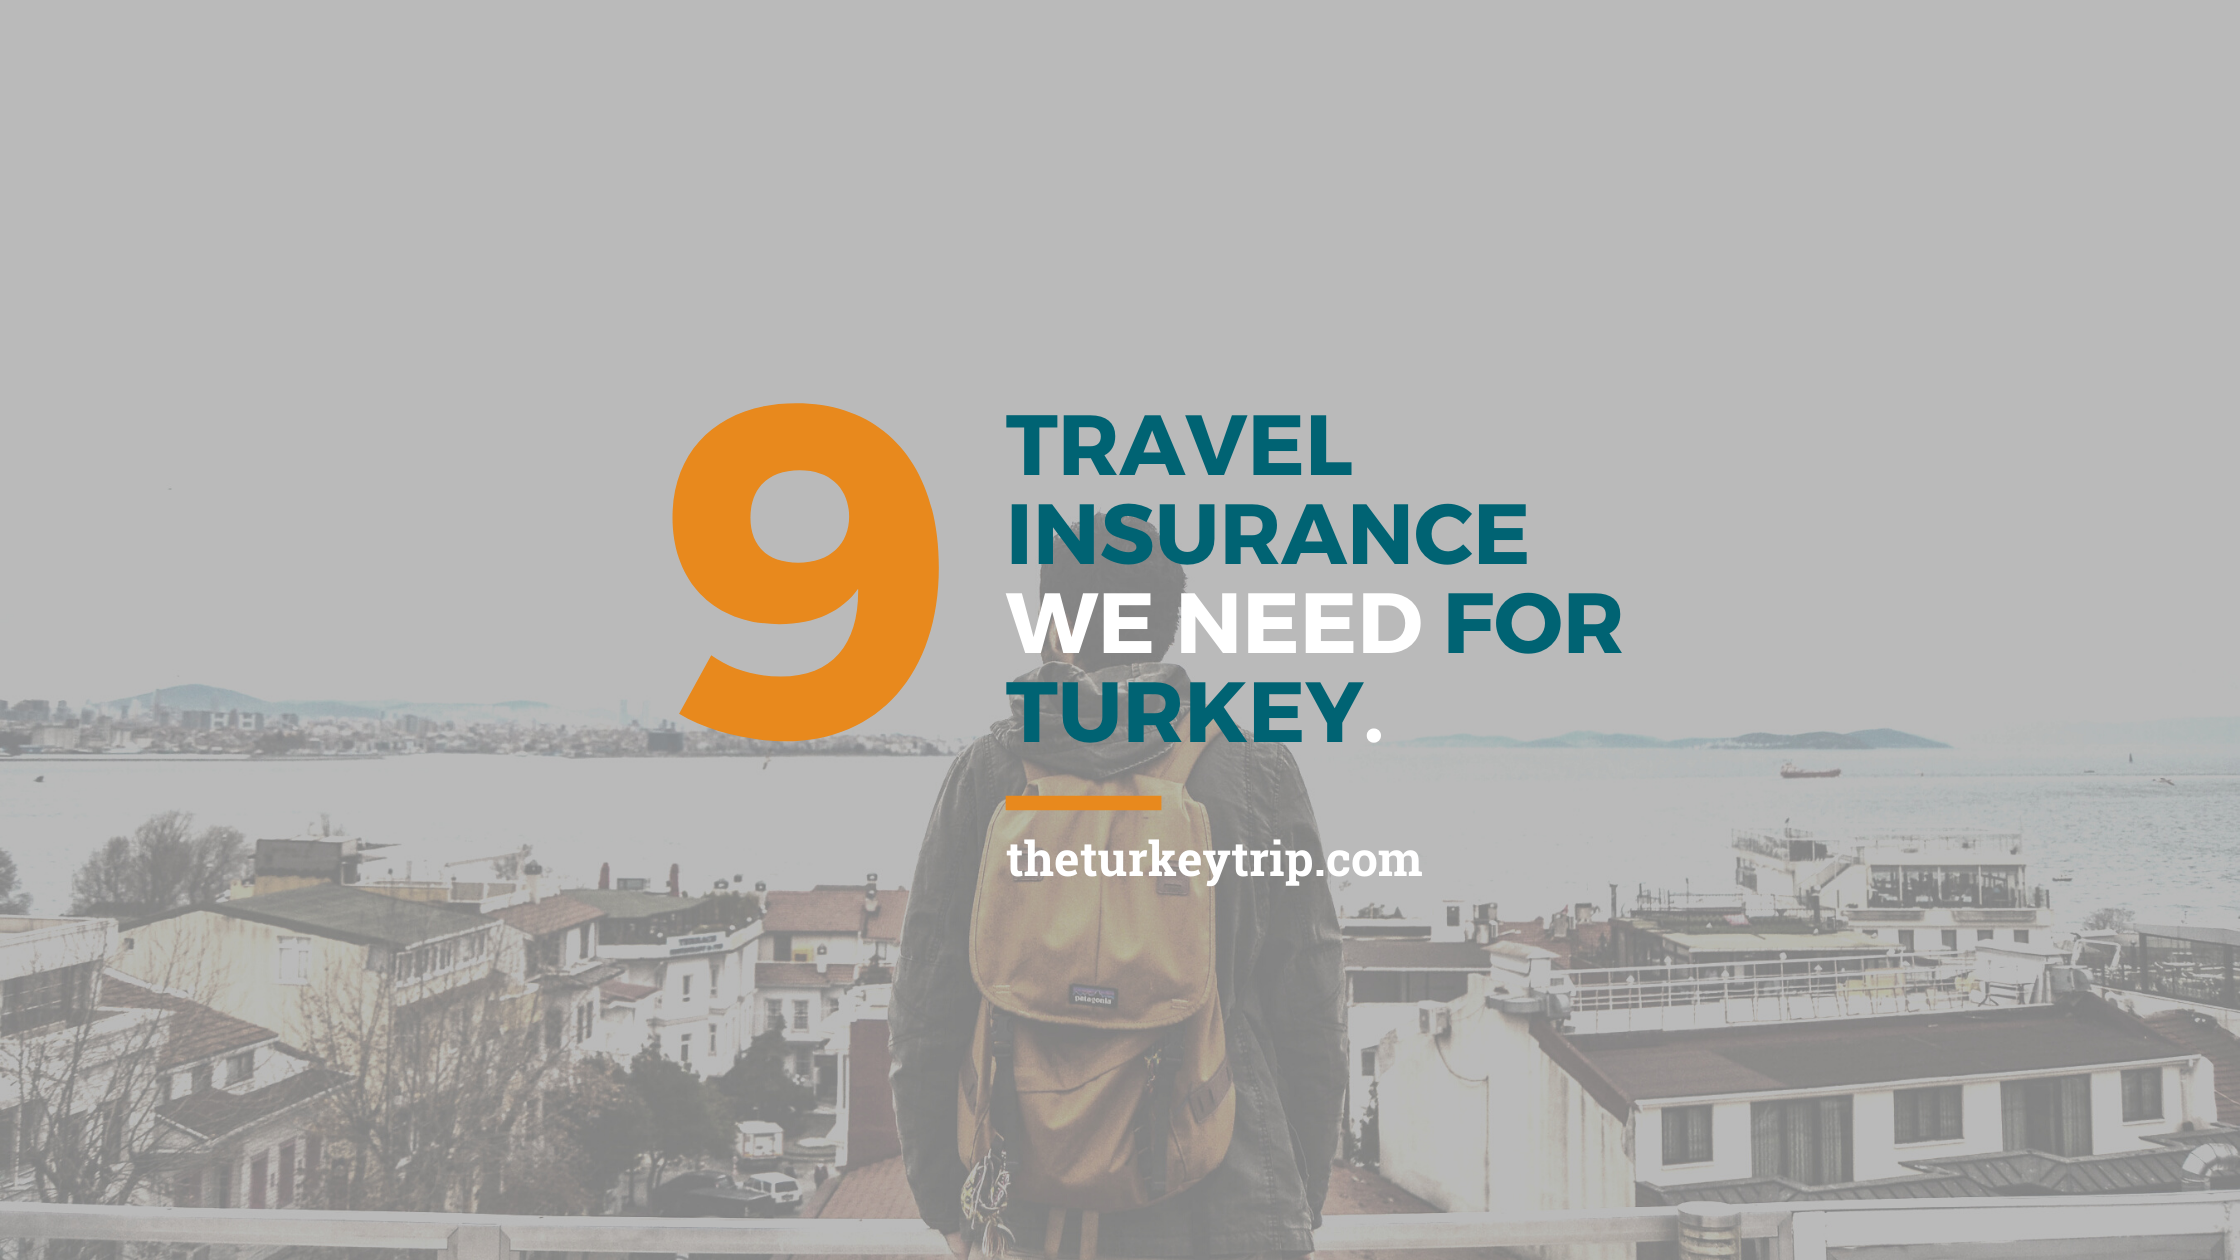 What Travel Insurance Do We Need For Turkey